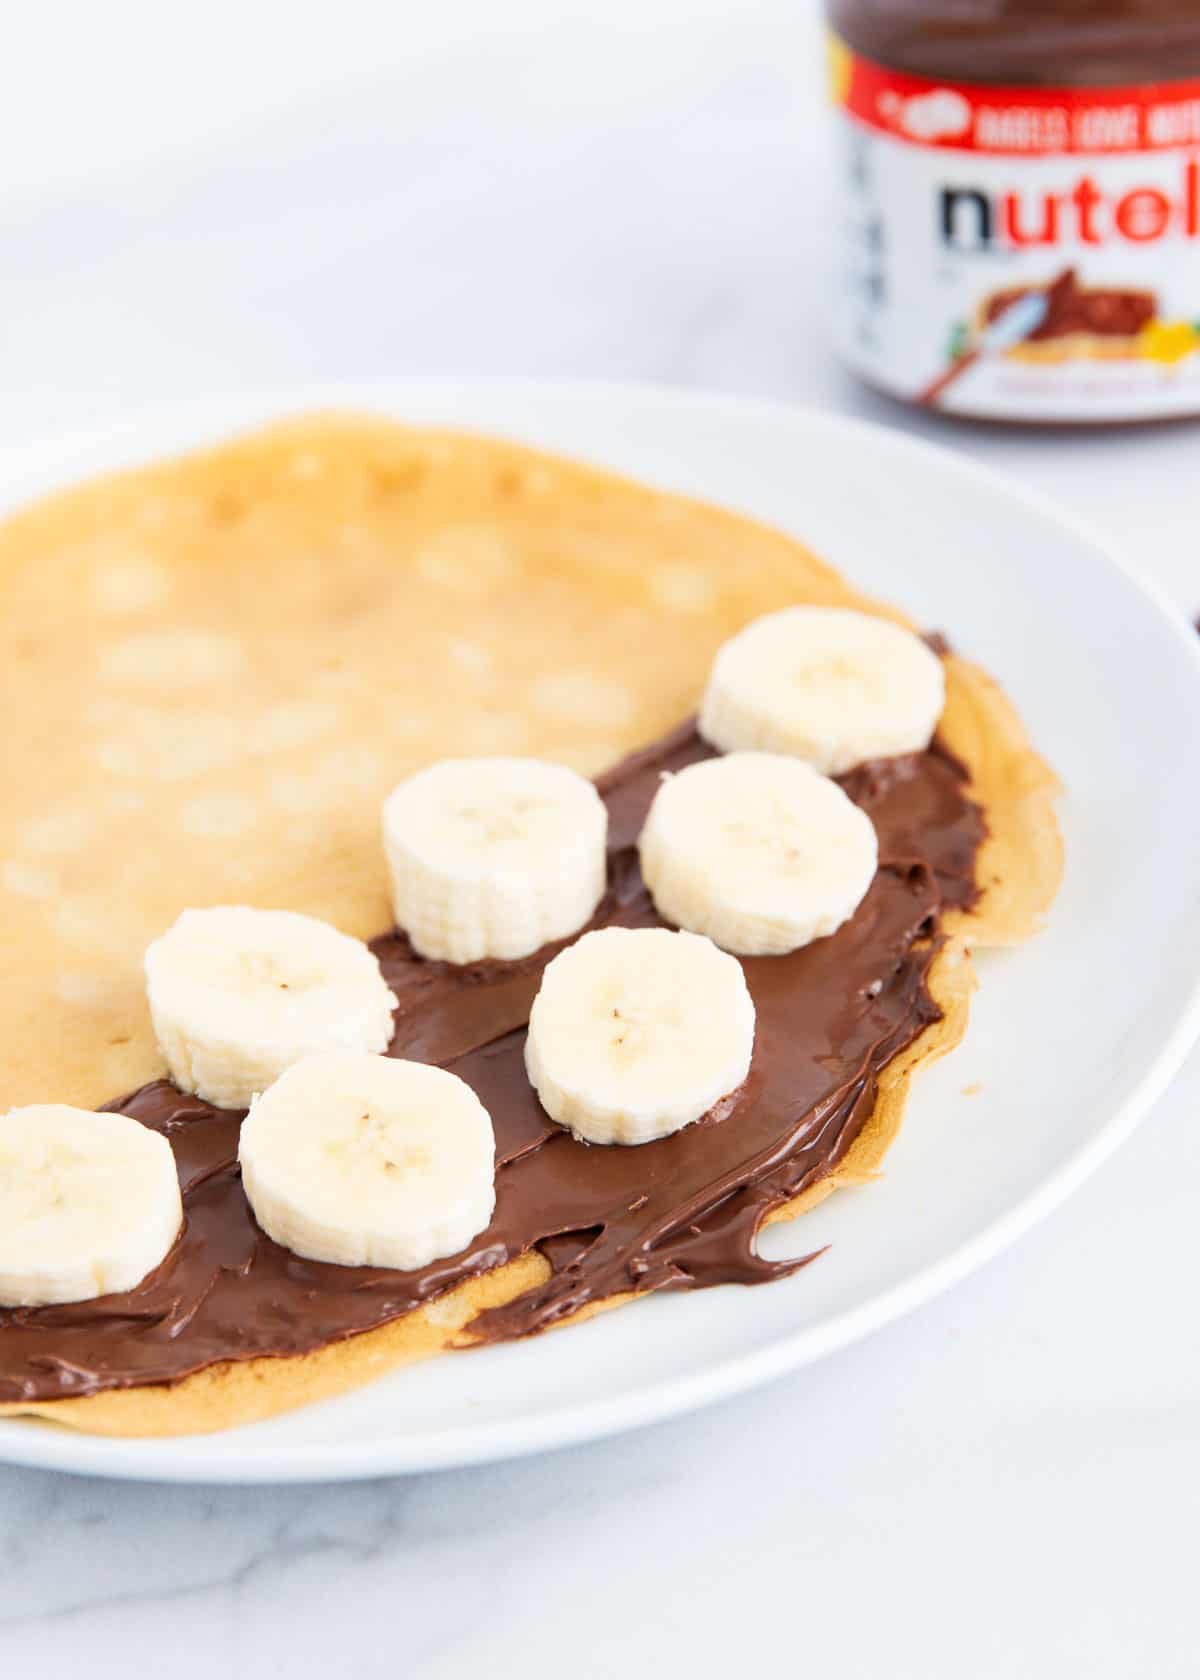 A nutella crepe with bananas on it. 